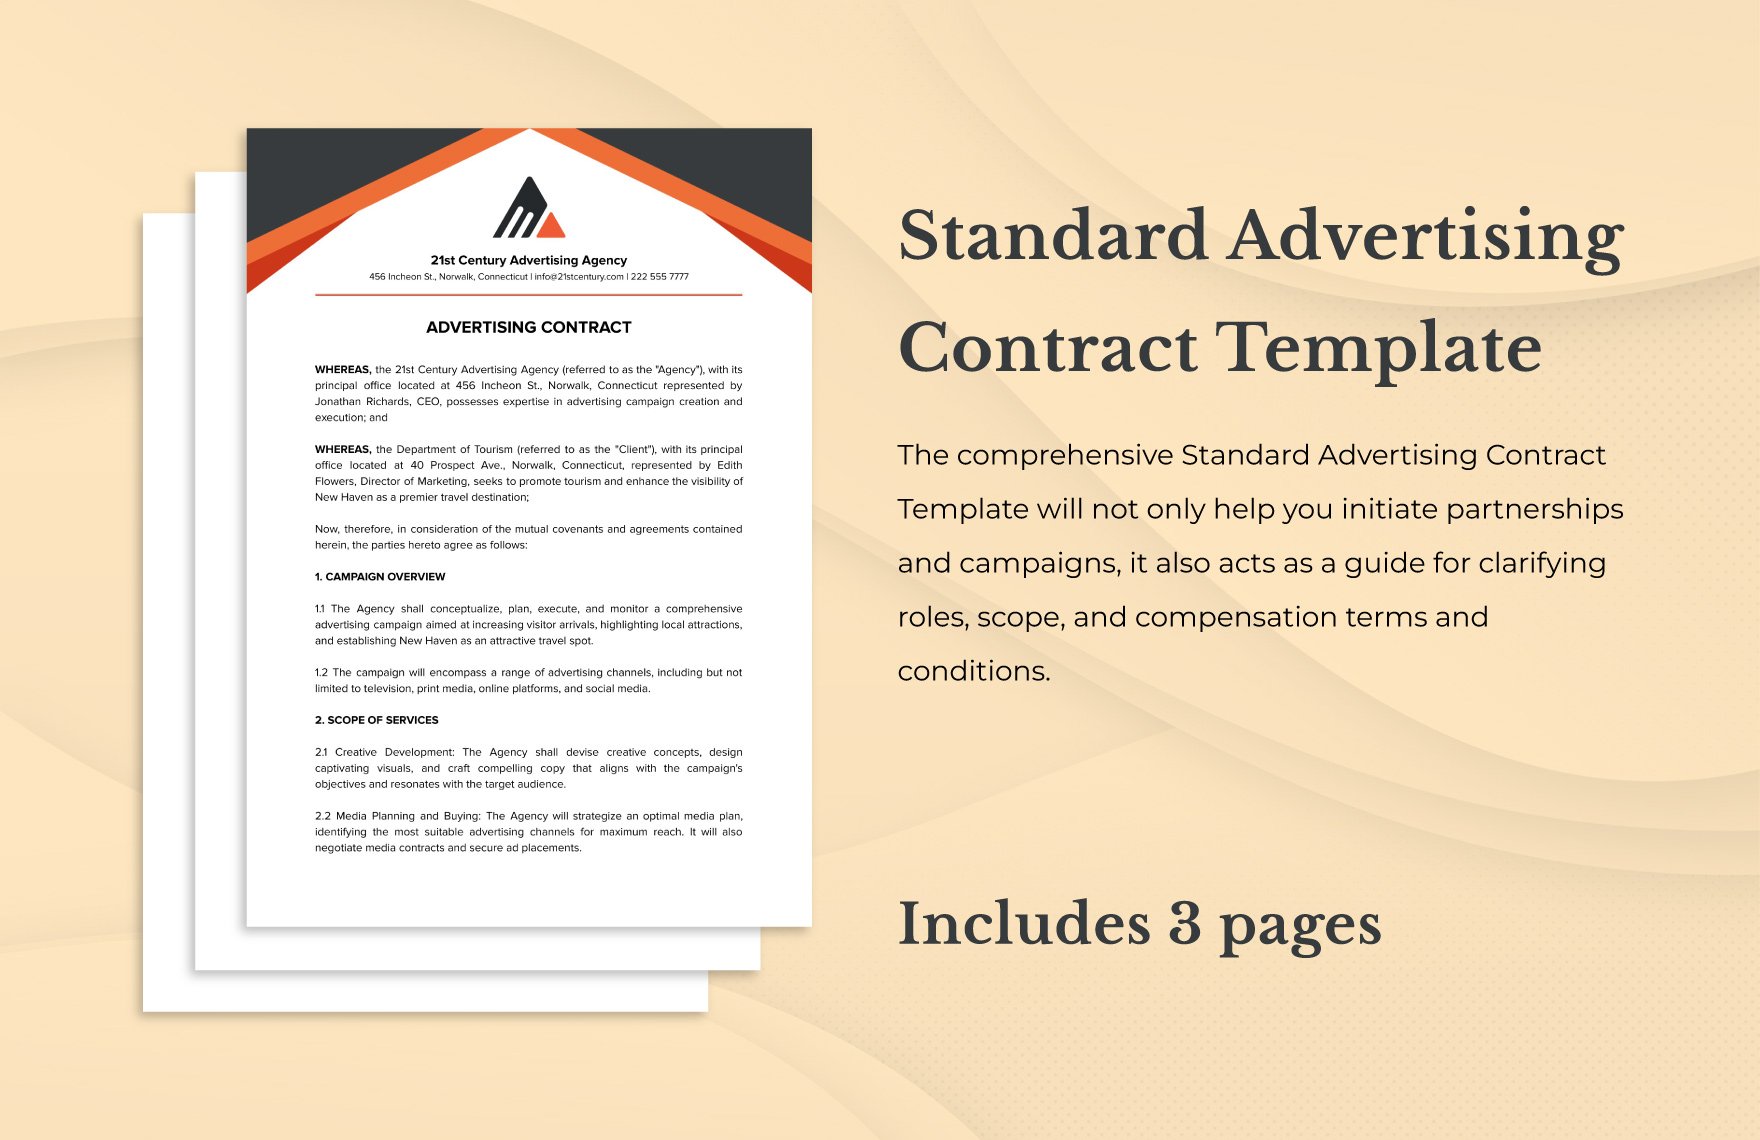 Standard Advertising Contract Template